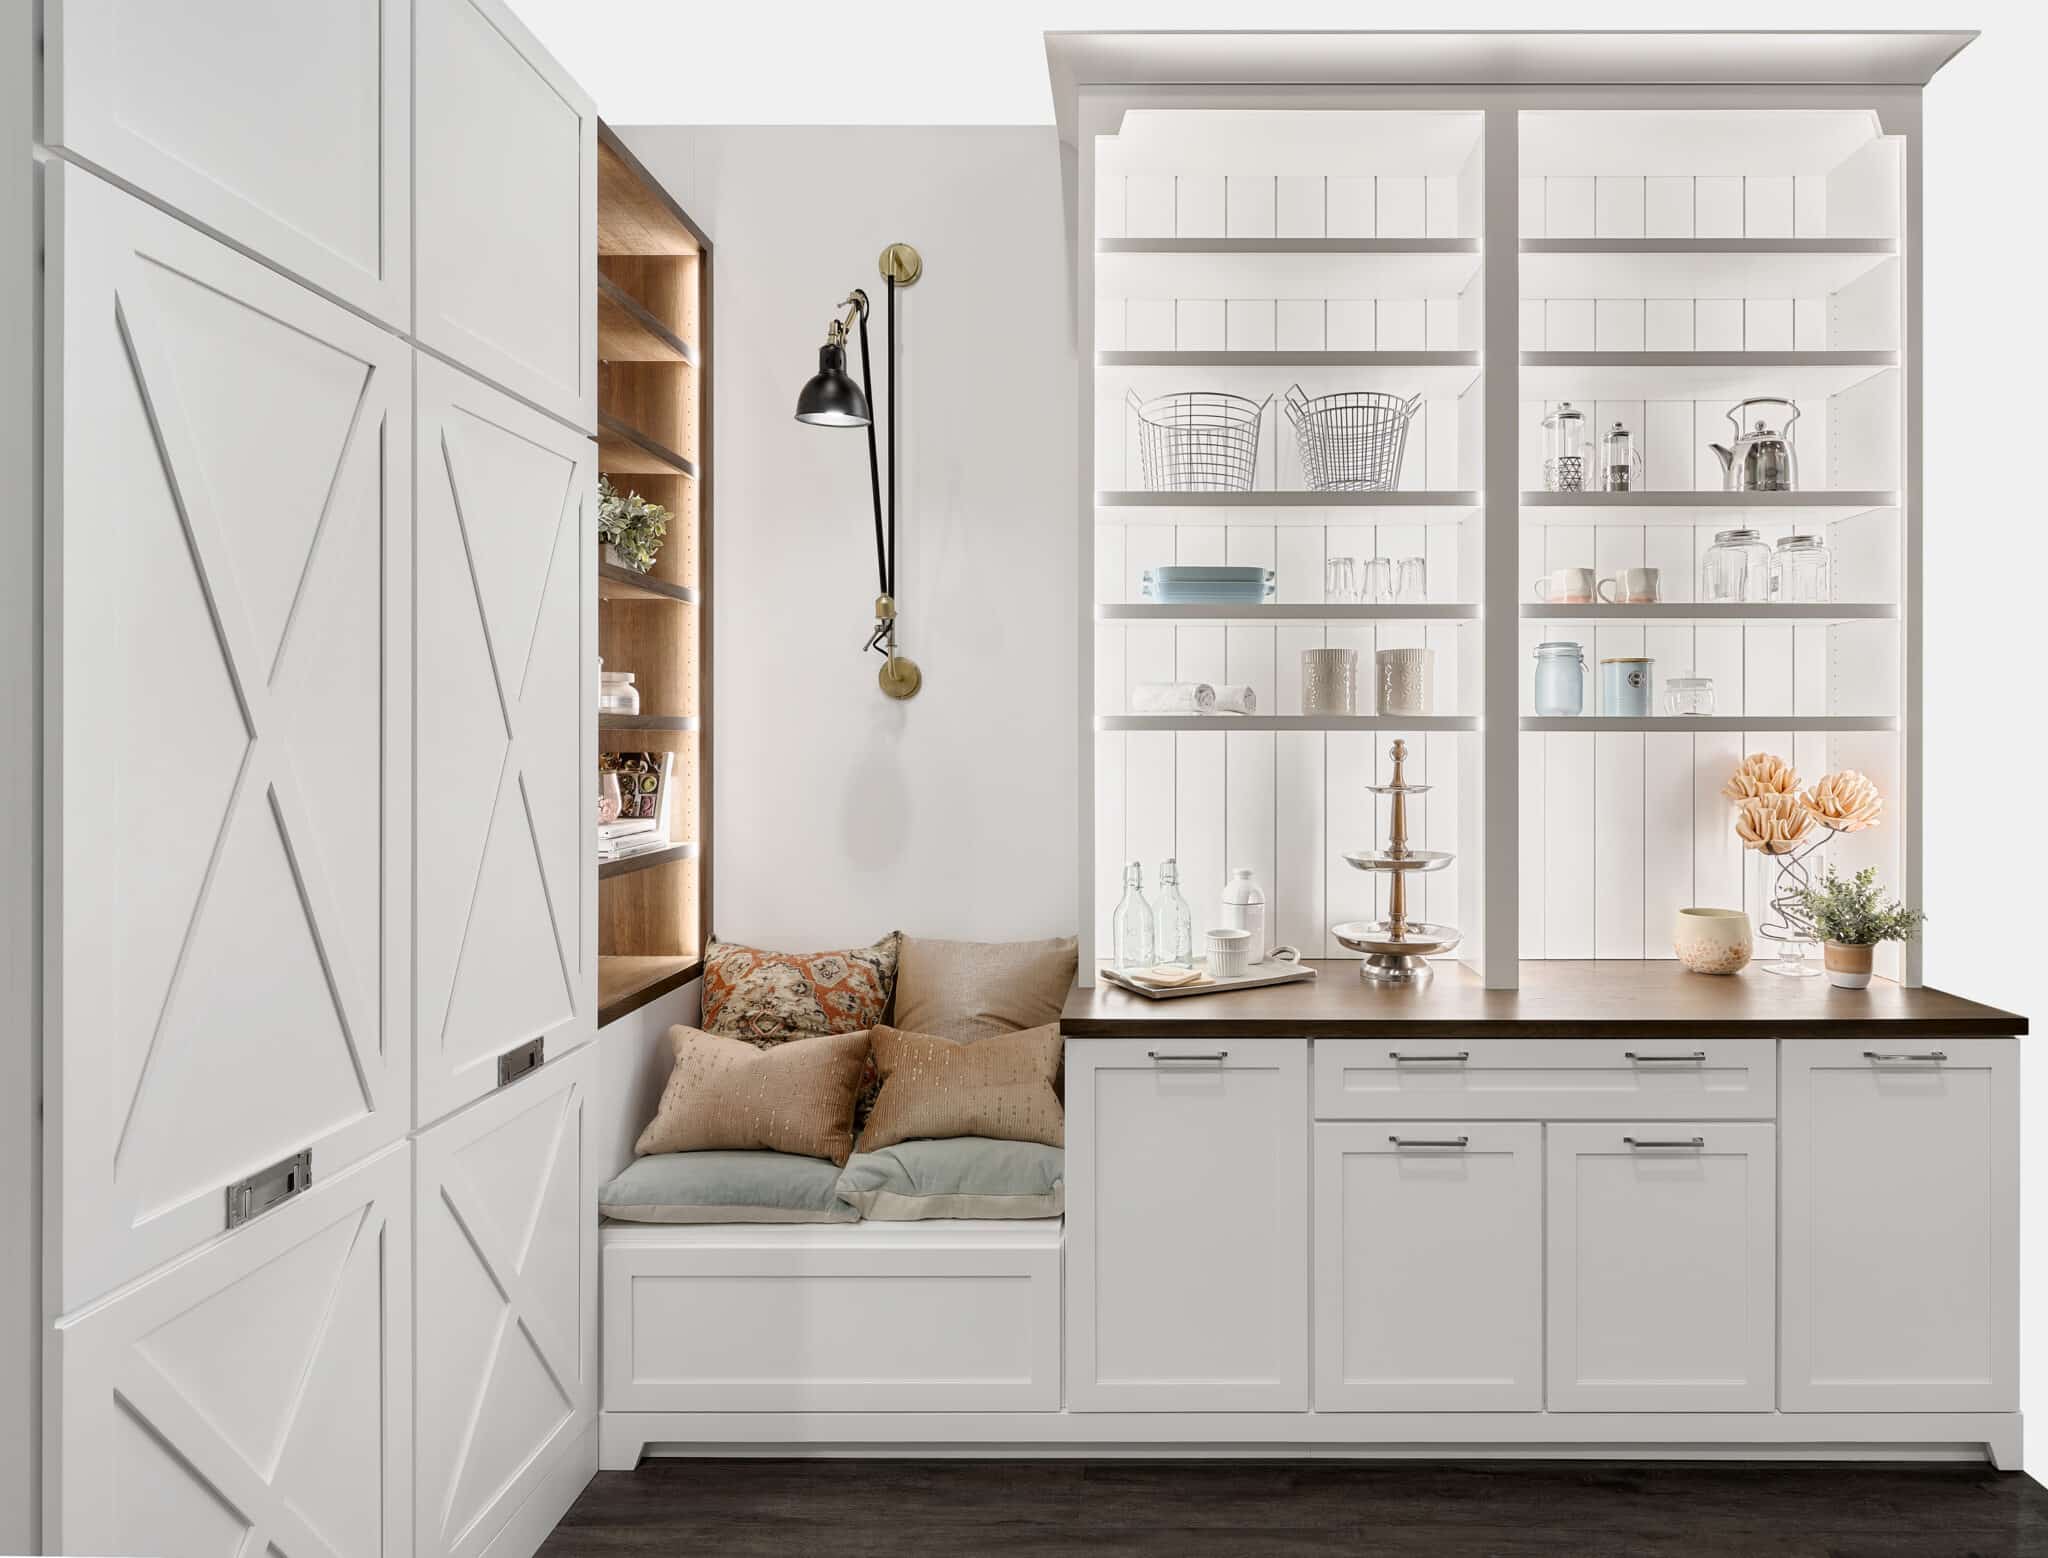 A Canadian Home style kitchen with white shelves and a bench.